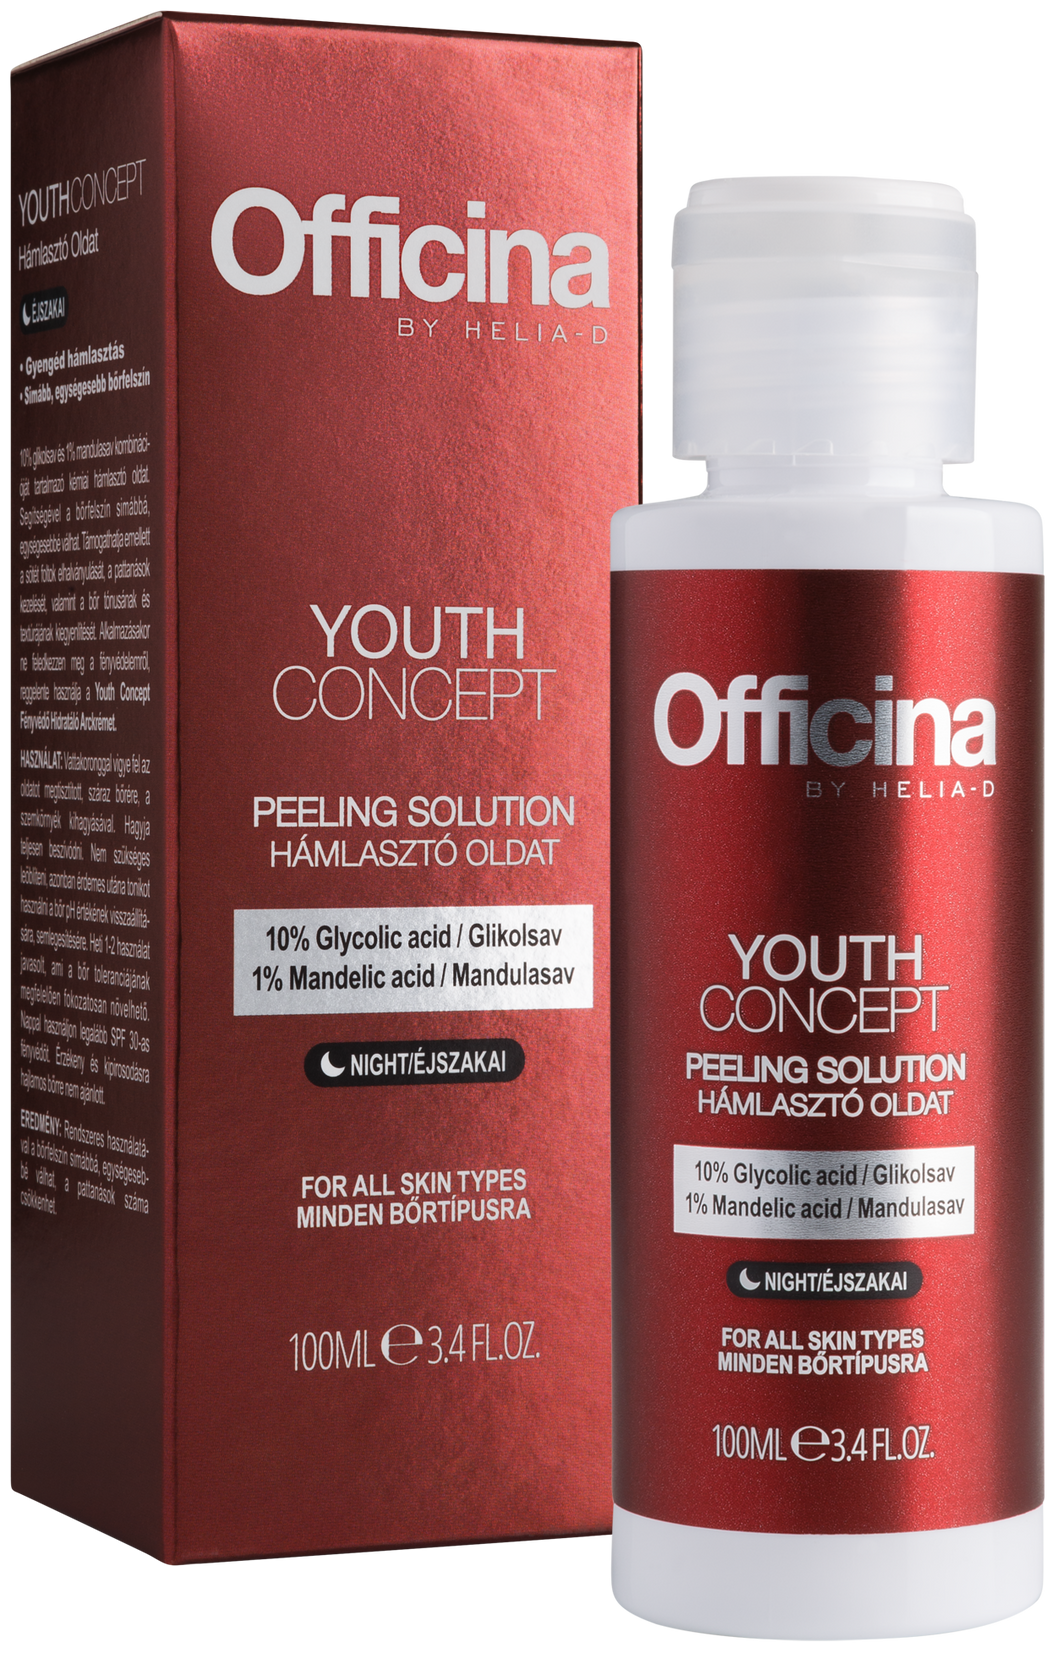 Officina by Helia-D Youth Concept Peeling Solution 100 ml